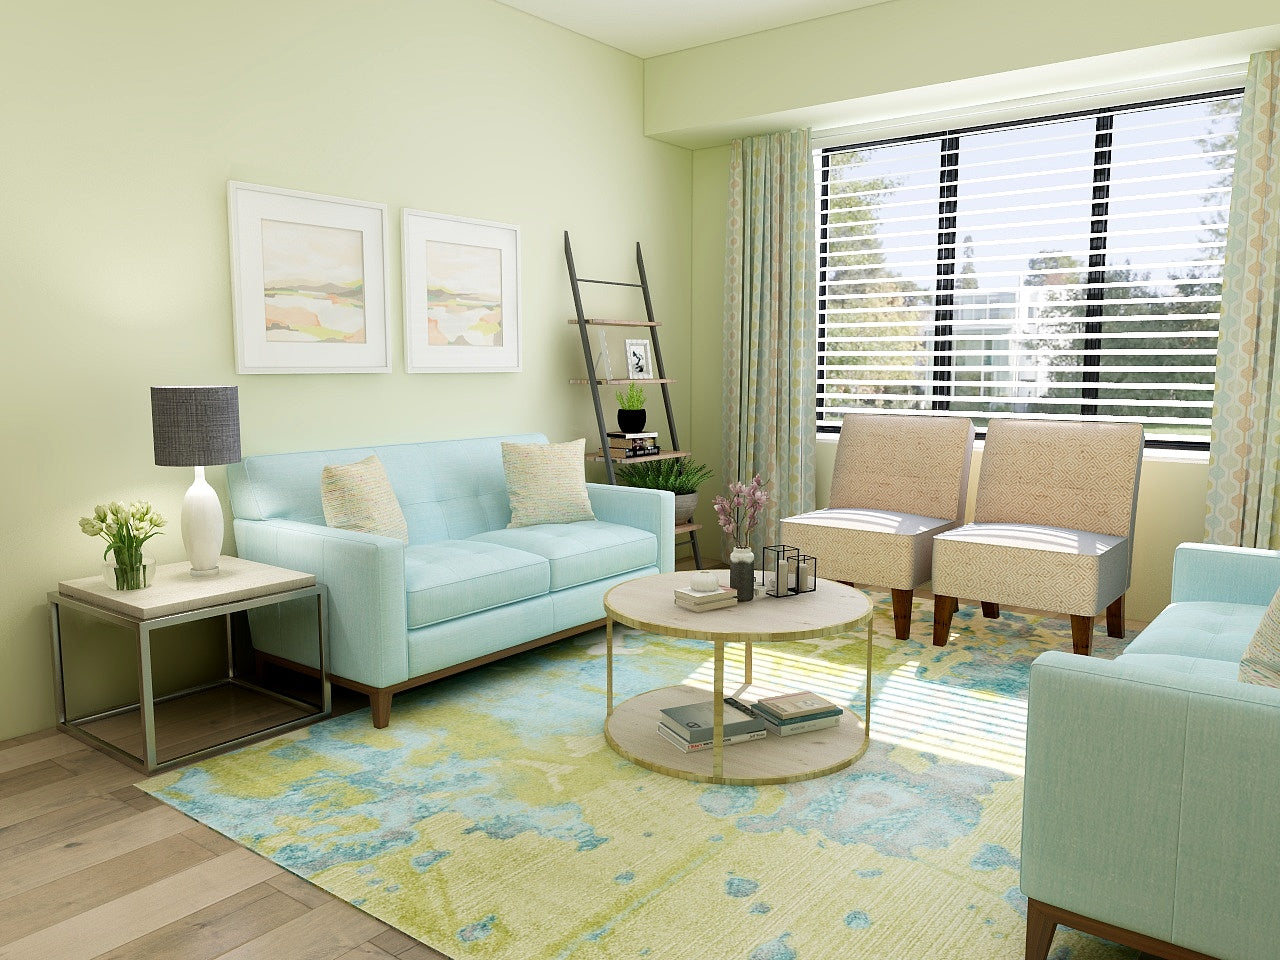 Aqua, green and peach tones bring the feel of the beach into this lovely condo.  A mix of woods and metals, and a variety of fabric textures gives this room a comfortable down-to-earth feel while still remaing classy and elegant. The 3D render gives a realistic representation of the room. 